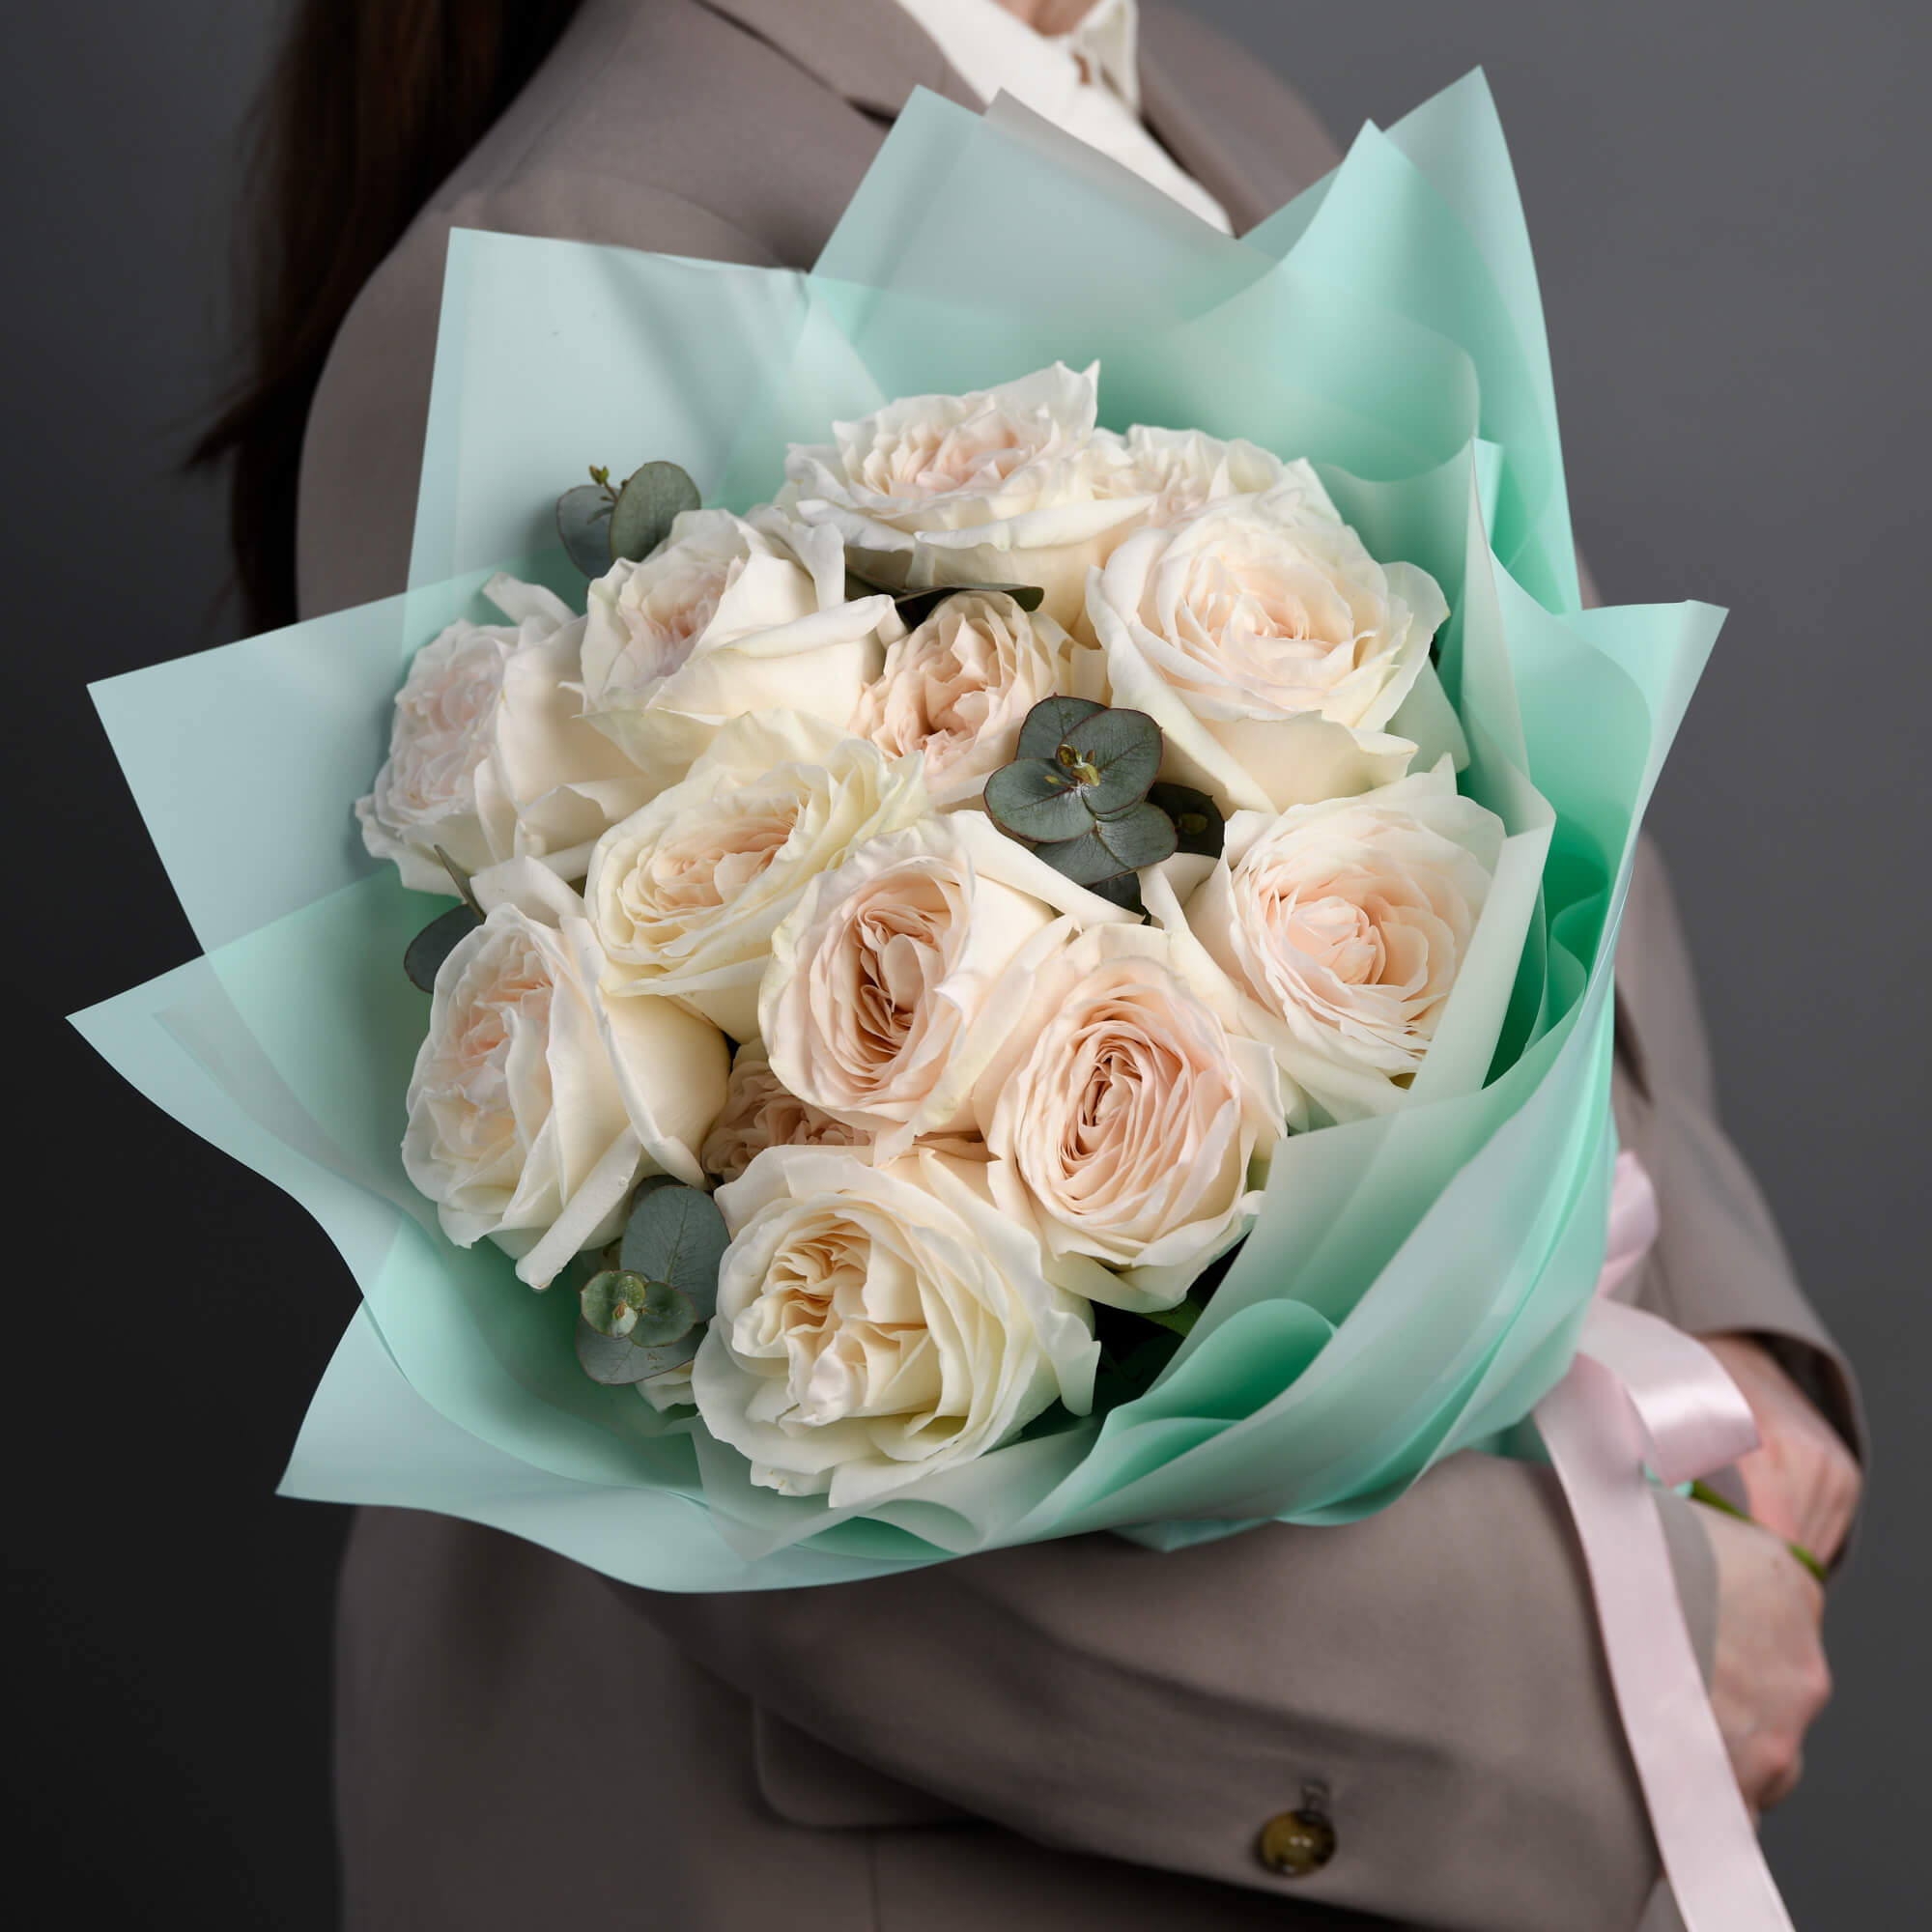 Bouquet of 17 roses